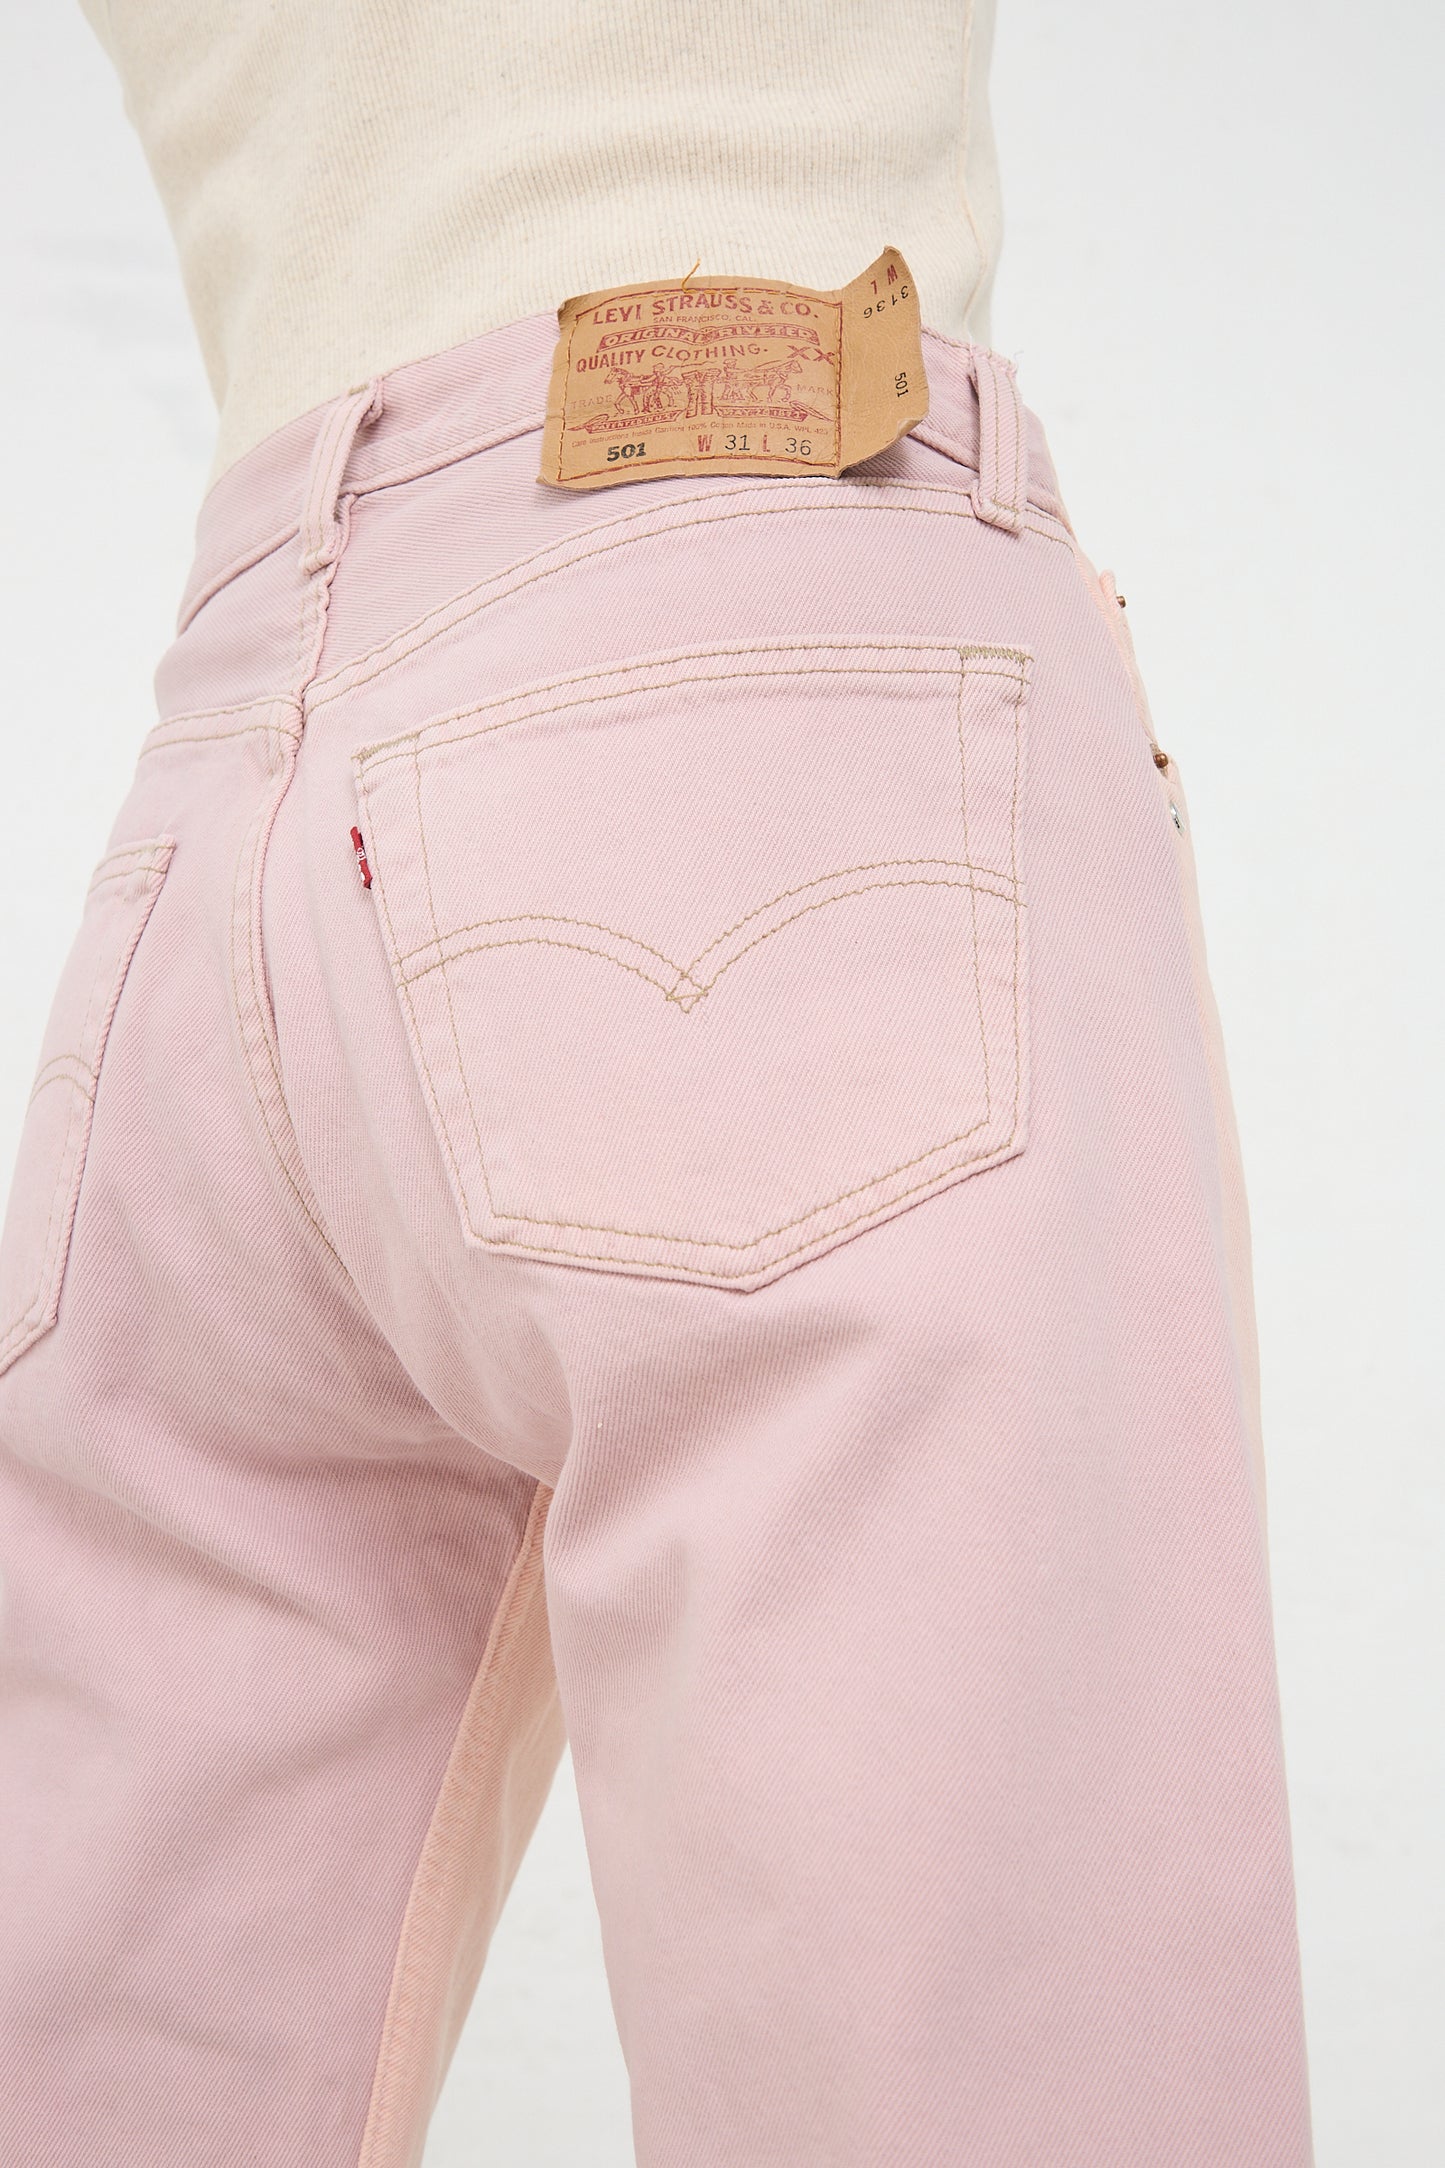 Close-up of Bless No. 73 Jeanspleatfront in Pink/Purple denim jeans with a leather brand patch on the waistband.